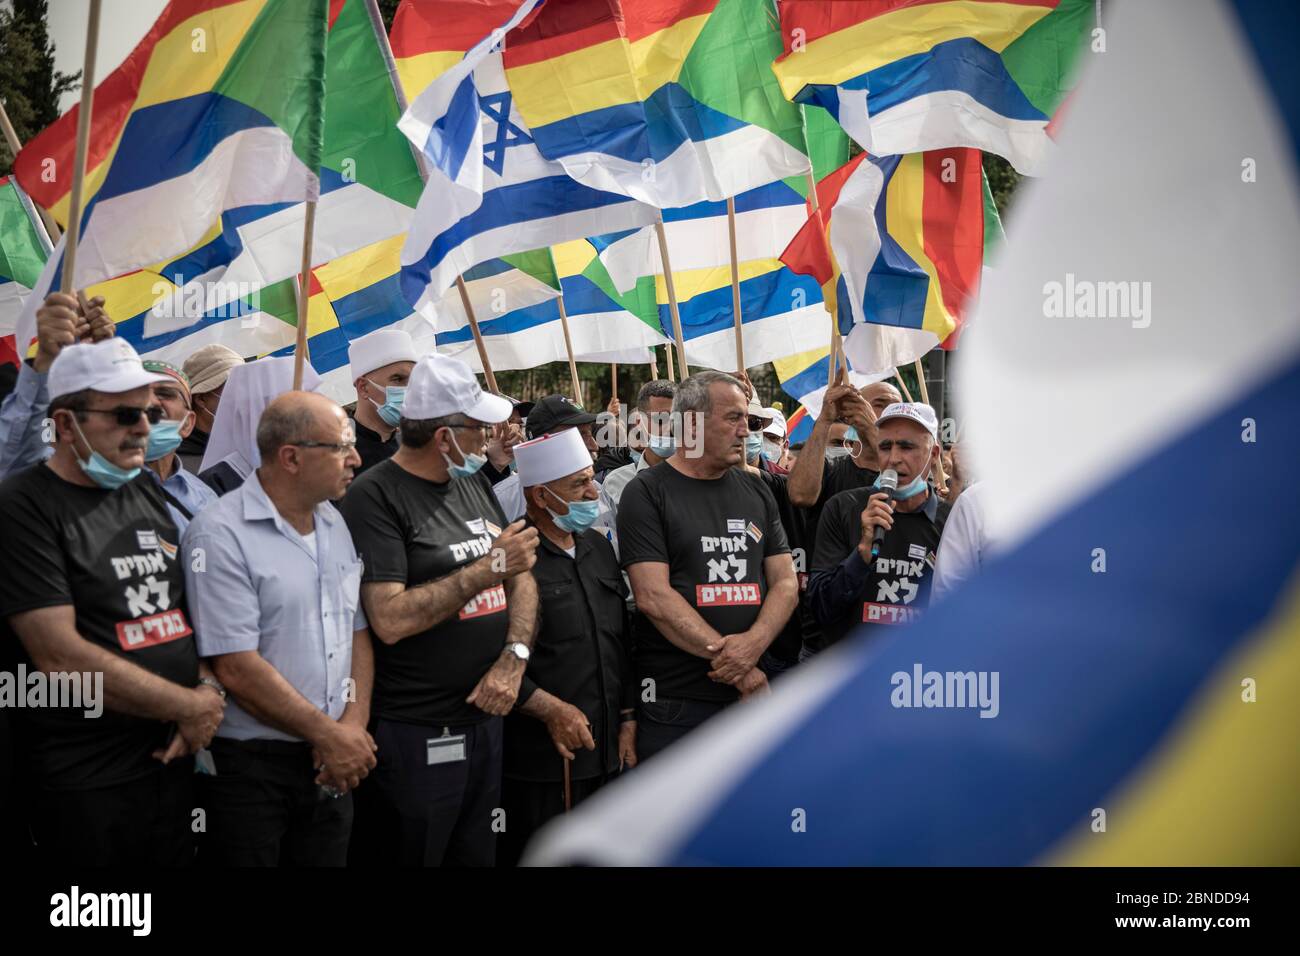 Jerusalem, Israel. 14th May, 2020. Participants wave flags as demonstrators  from different political groups protest against the forming of the new  Israeli government, led by leader of the Likud party Benjamin Netanyahu